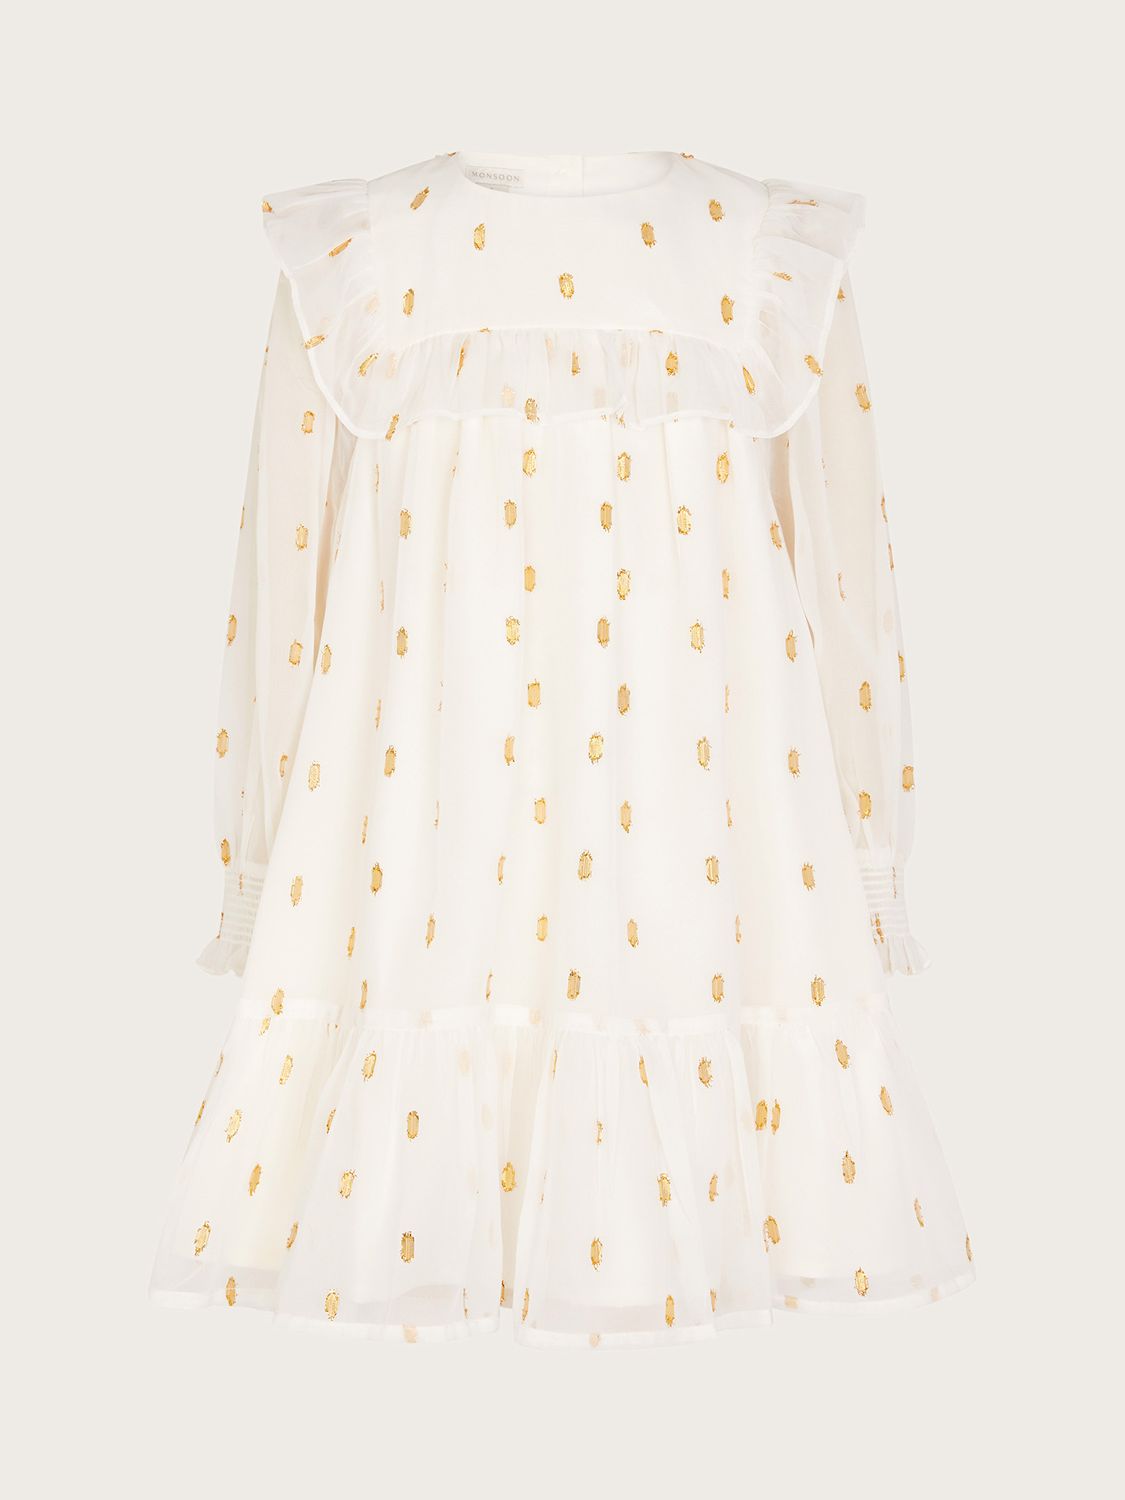 Monsoon Kids' Dobby Sparkle Party Dress, Ivory, 14-15 years